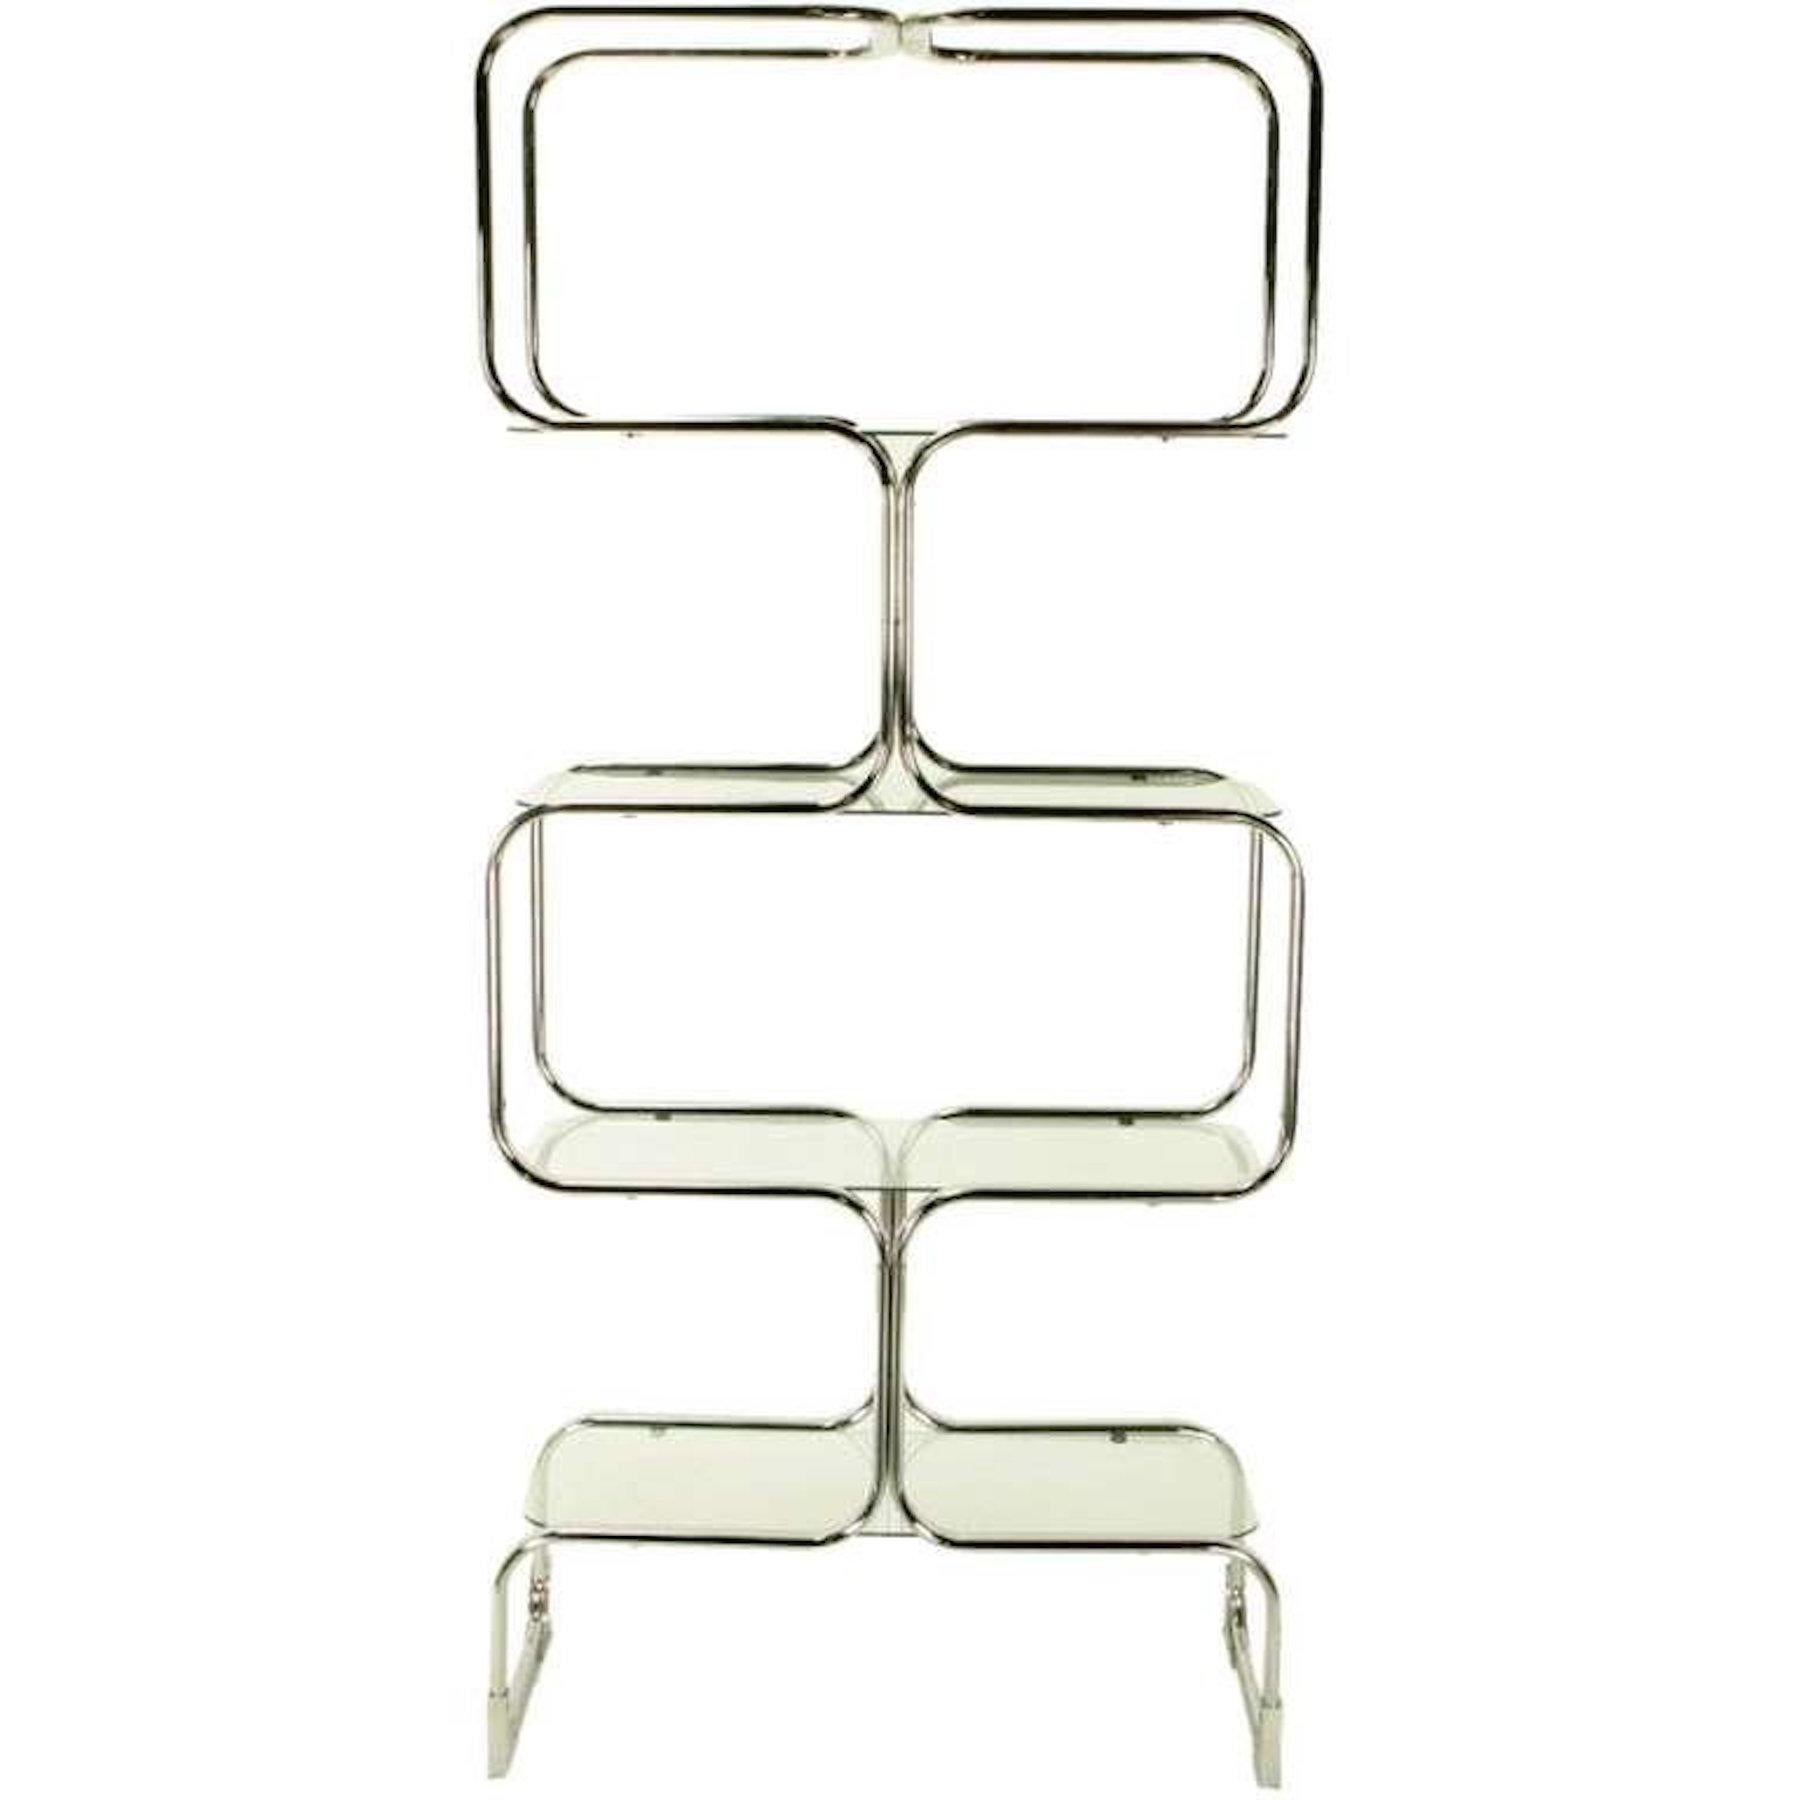 Italian Midcentury Biomorphic Four-Tiered Étagère